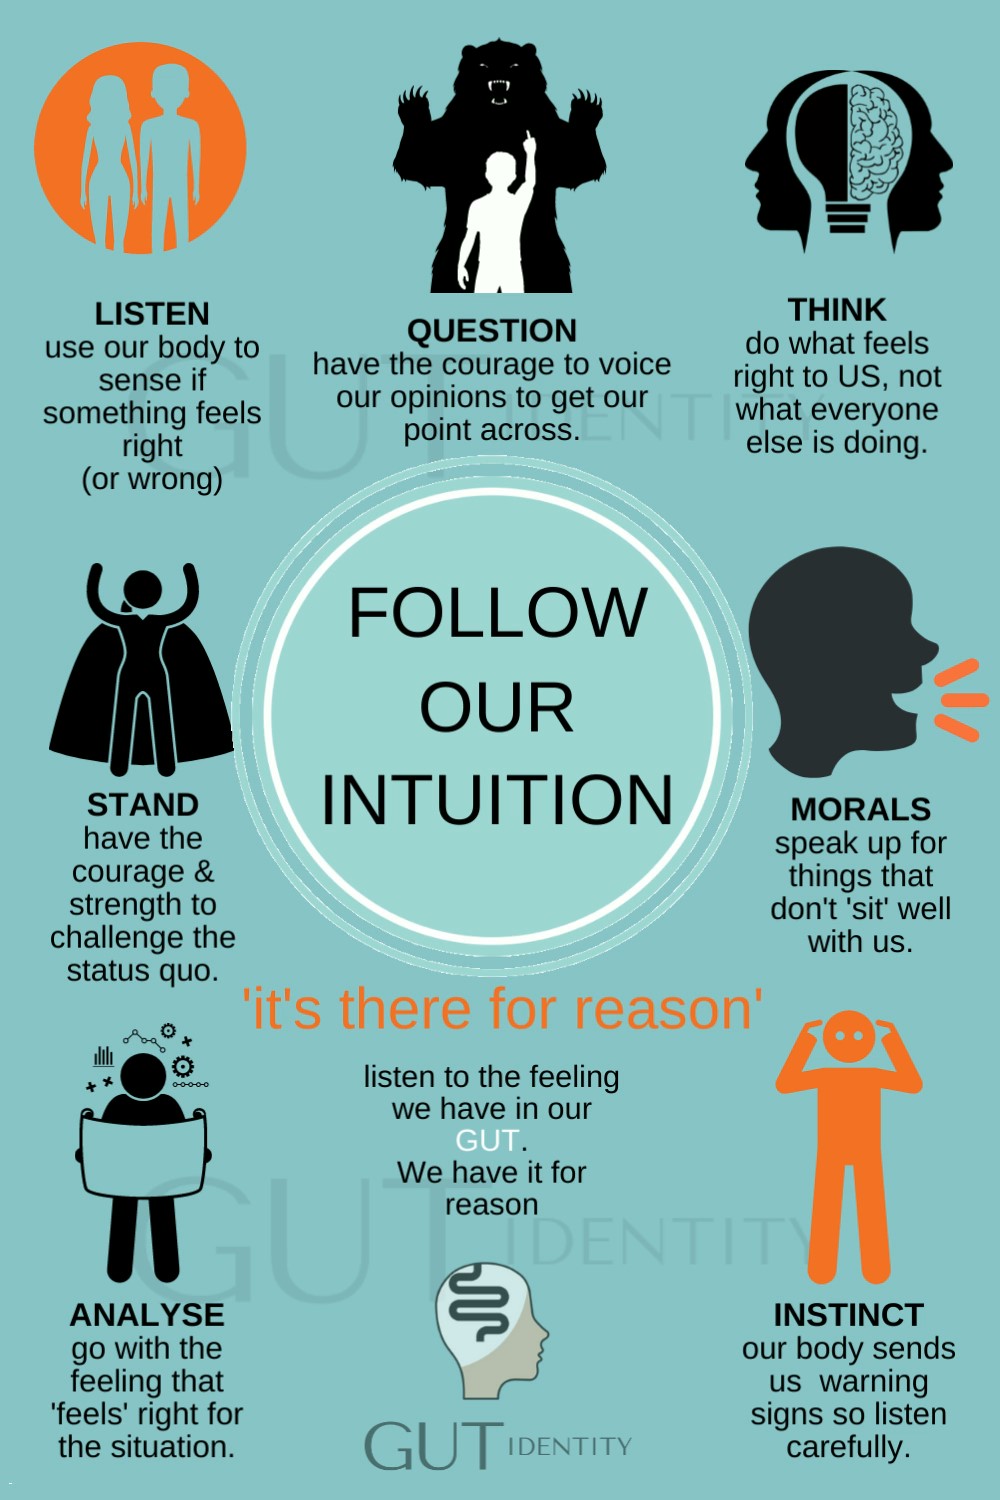 Following our Intuition by Gutidentity